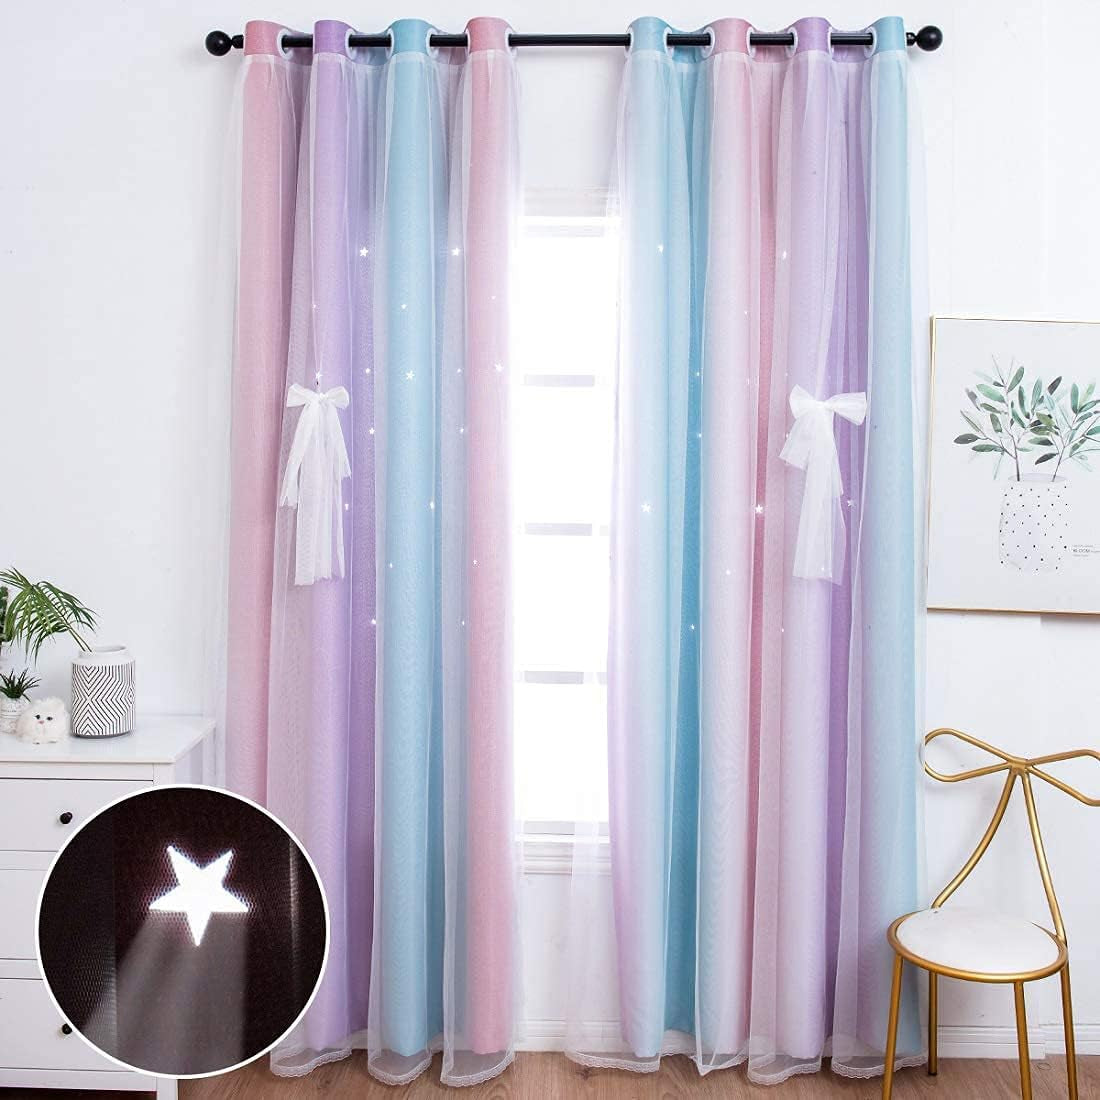 UNISTAR 2 Panels Stars Blackout Curtains for Bedroom Girls Kids Baby Window Decoration Double Layer Star Cut Out Aesthetic Living Room Decor Wall Home Curtain,W52 X L63 Inches,Pink  UNISTAR 2 Panels 丨 Rainbow-Pinkpurple 63.00" X 42.00" 